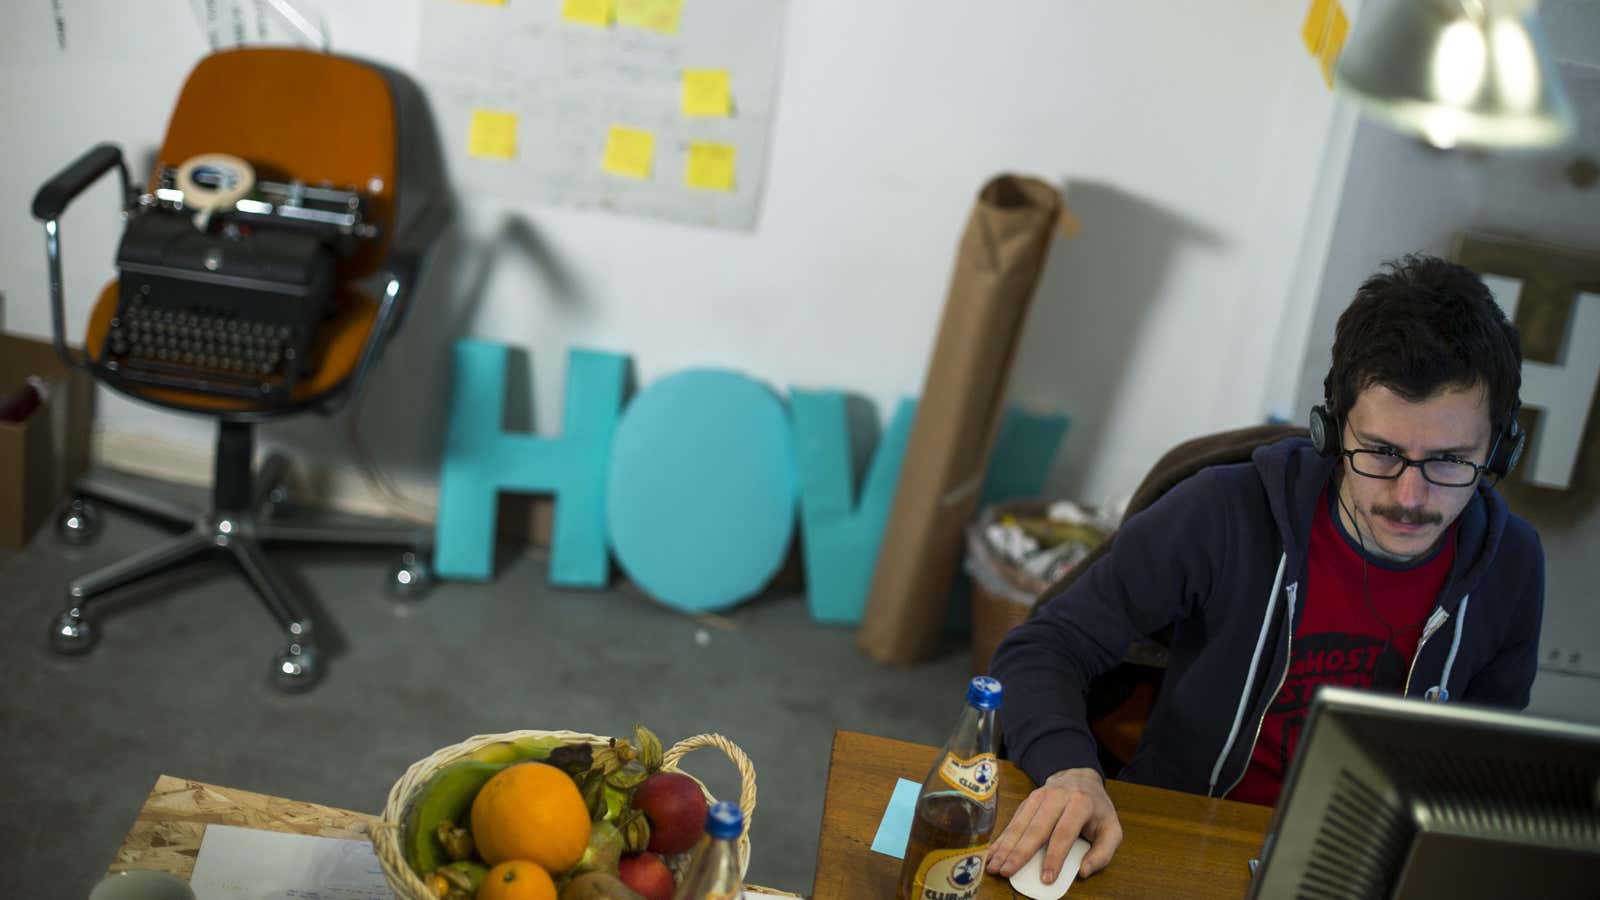 Alessandro Contini of Italy works in the office of the HowDo, a “how-to-do-it-yourself” app,start-up company at the Wostel co-working space in Berlin March 18, 2013.…